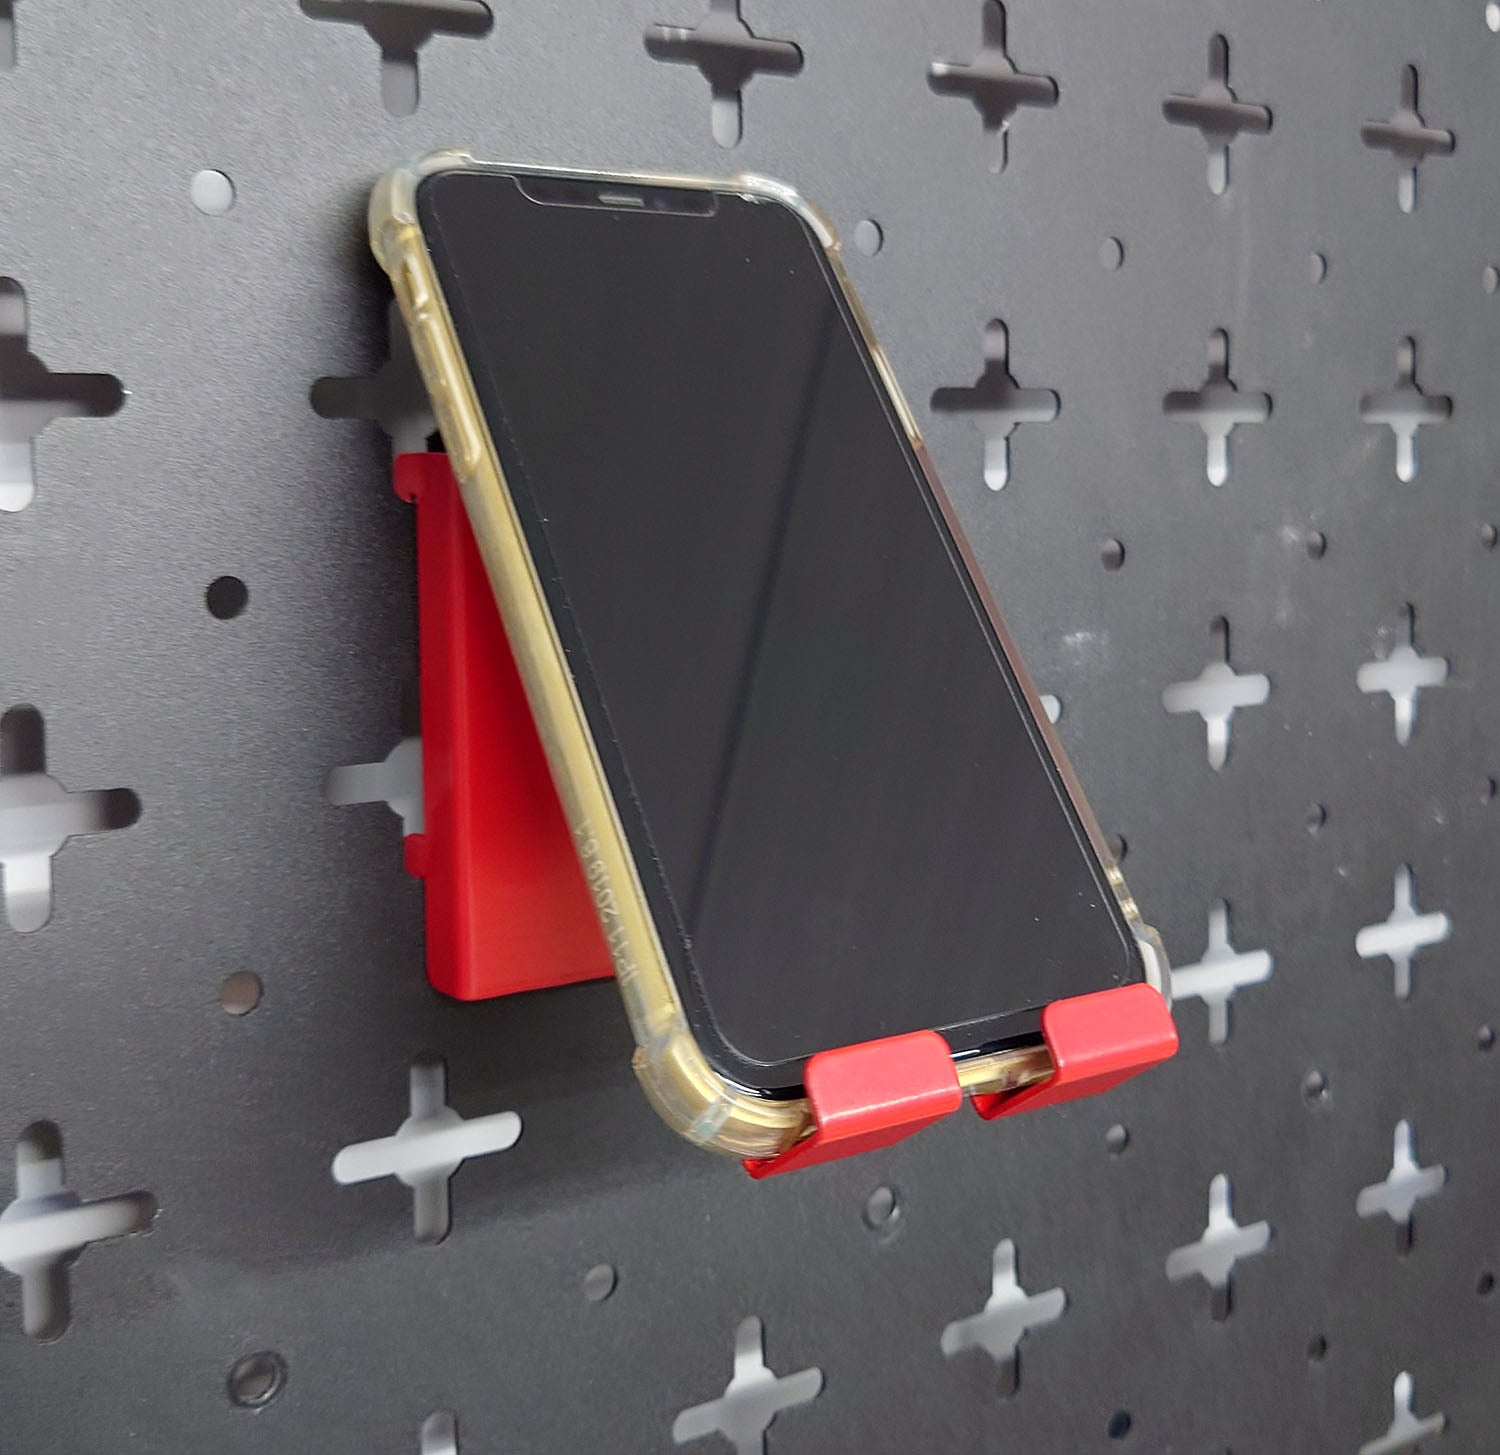 Nukeson Tool Wall - Mobile Phone Holder Attachment